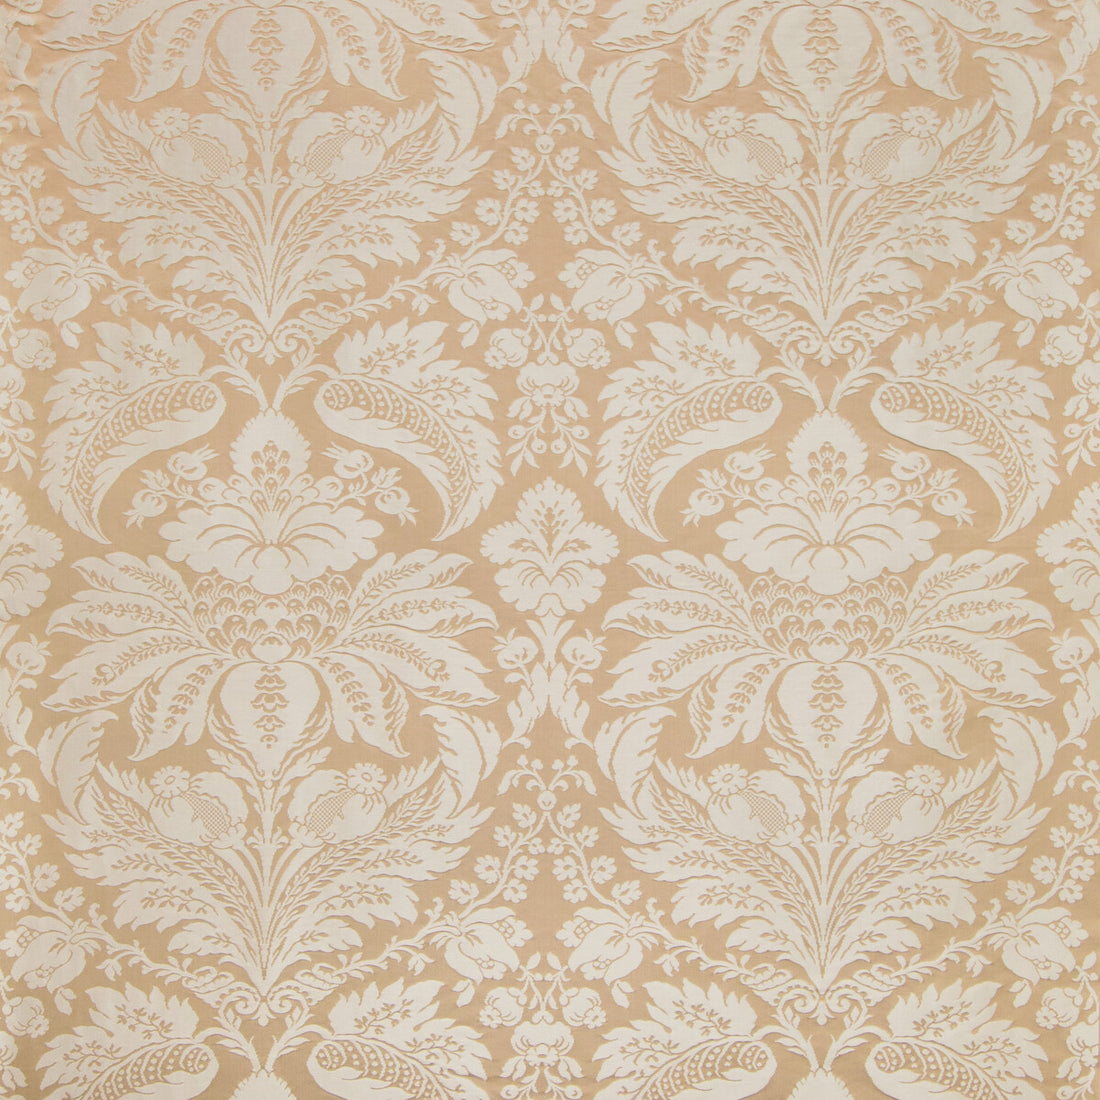 Damask Pierre fabric in sand color - pattern 8013188.1116.0 - by Brunschwig &amp; Fils in the B&amp;F Showroom Exclusive 2019 collection